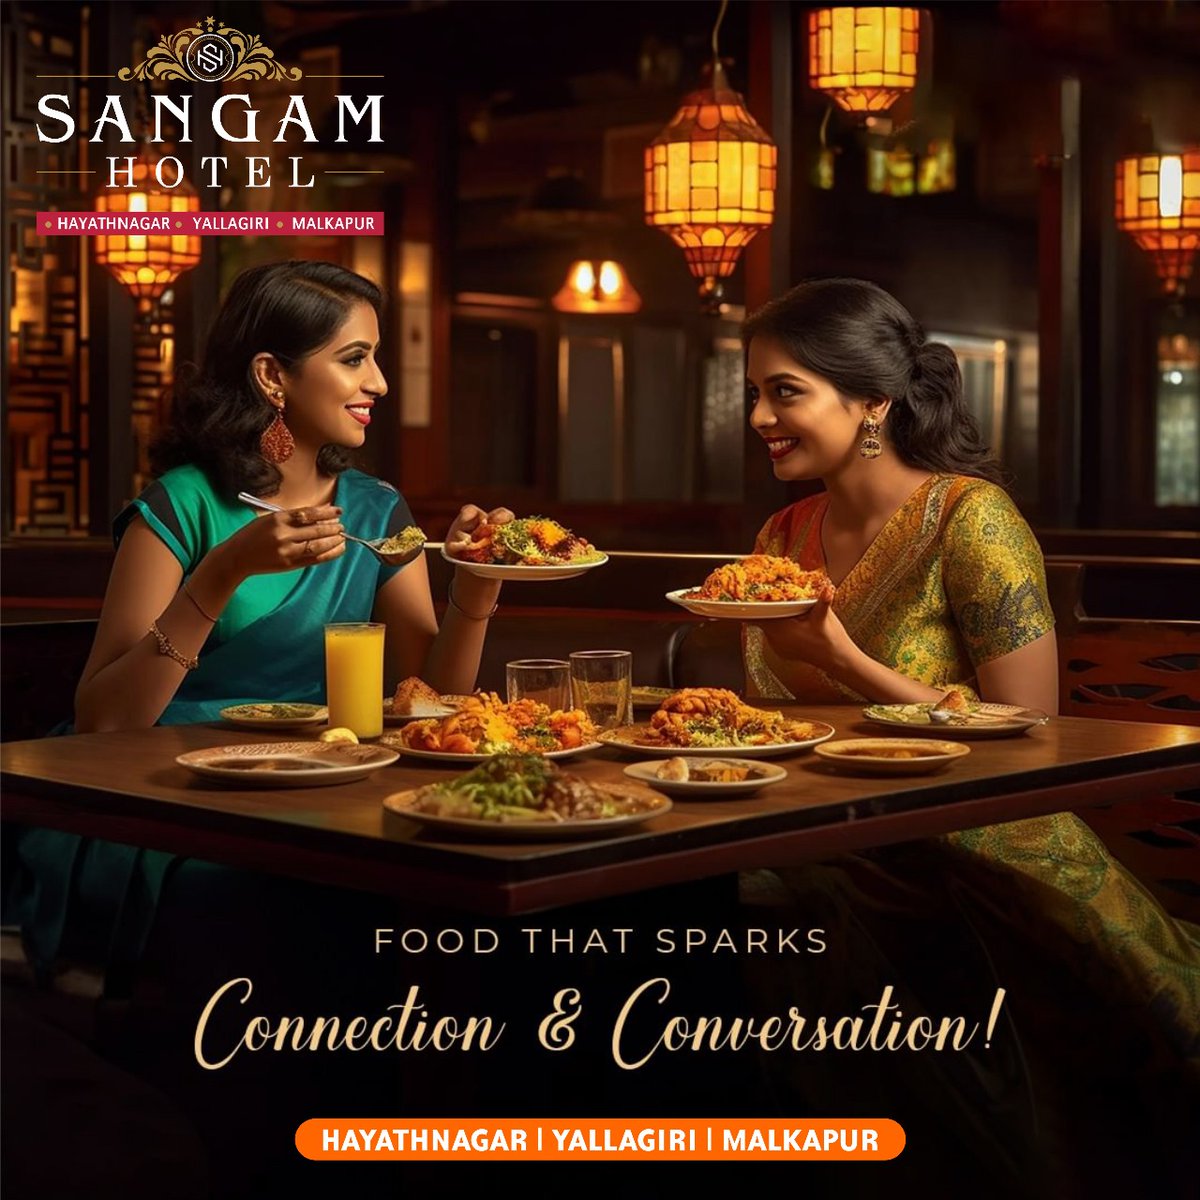 Food that Sparks Connection & Conversation!! @Sangamhotelsma #indianfood #foodie #food #foodphotography #foodblogger #foodporn #foodstagram #foodlover #northindianfood #homemade #instafood #foodgasm #delicious #desifood #yummy